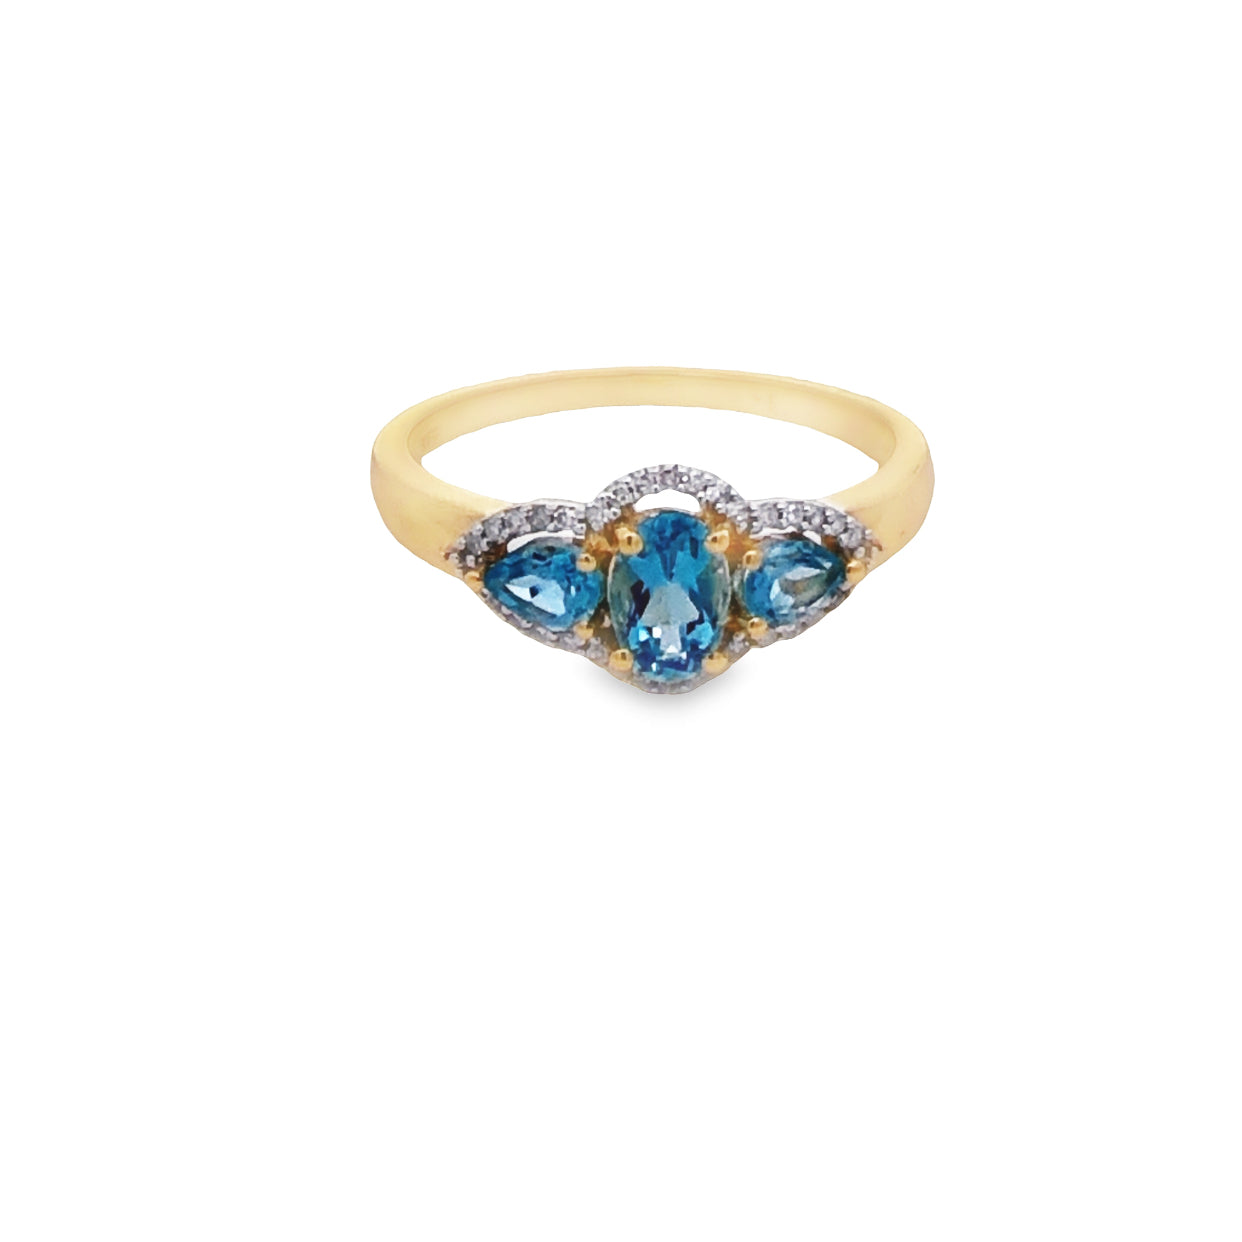 9Ct Yellow Gold 3 Stone Blue Topaz And Diamond Ring